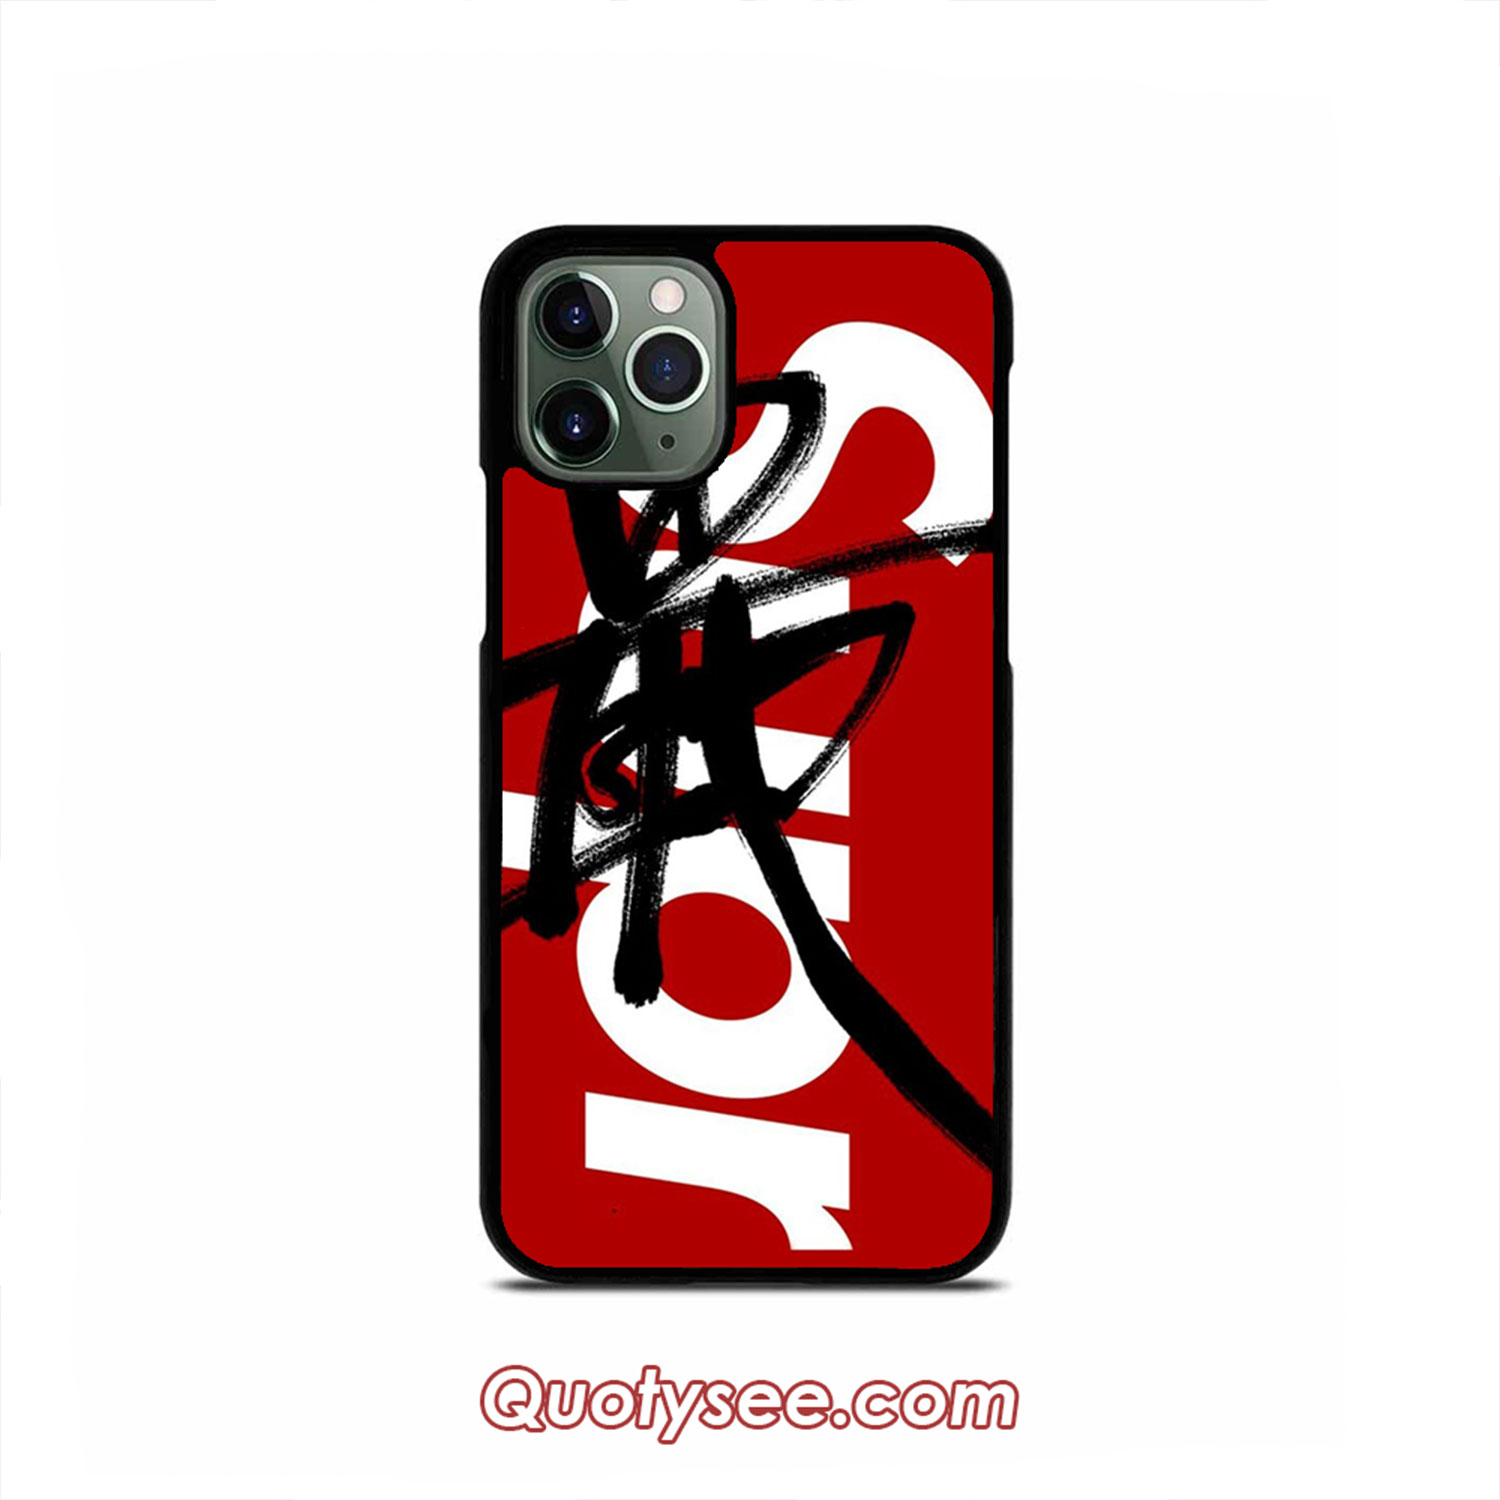 Sup Stussy Red Iphone Case 11 11 Pro 11 Pro Max Xs Max Xr X 8 8 Plus 7 7 Plus 6 6s Quotysee Com